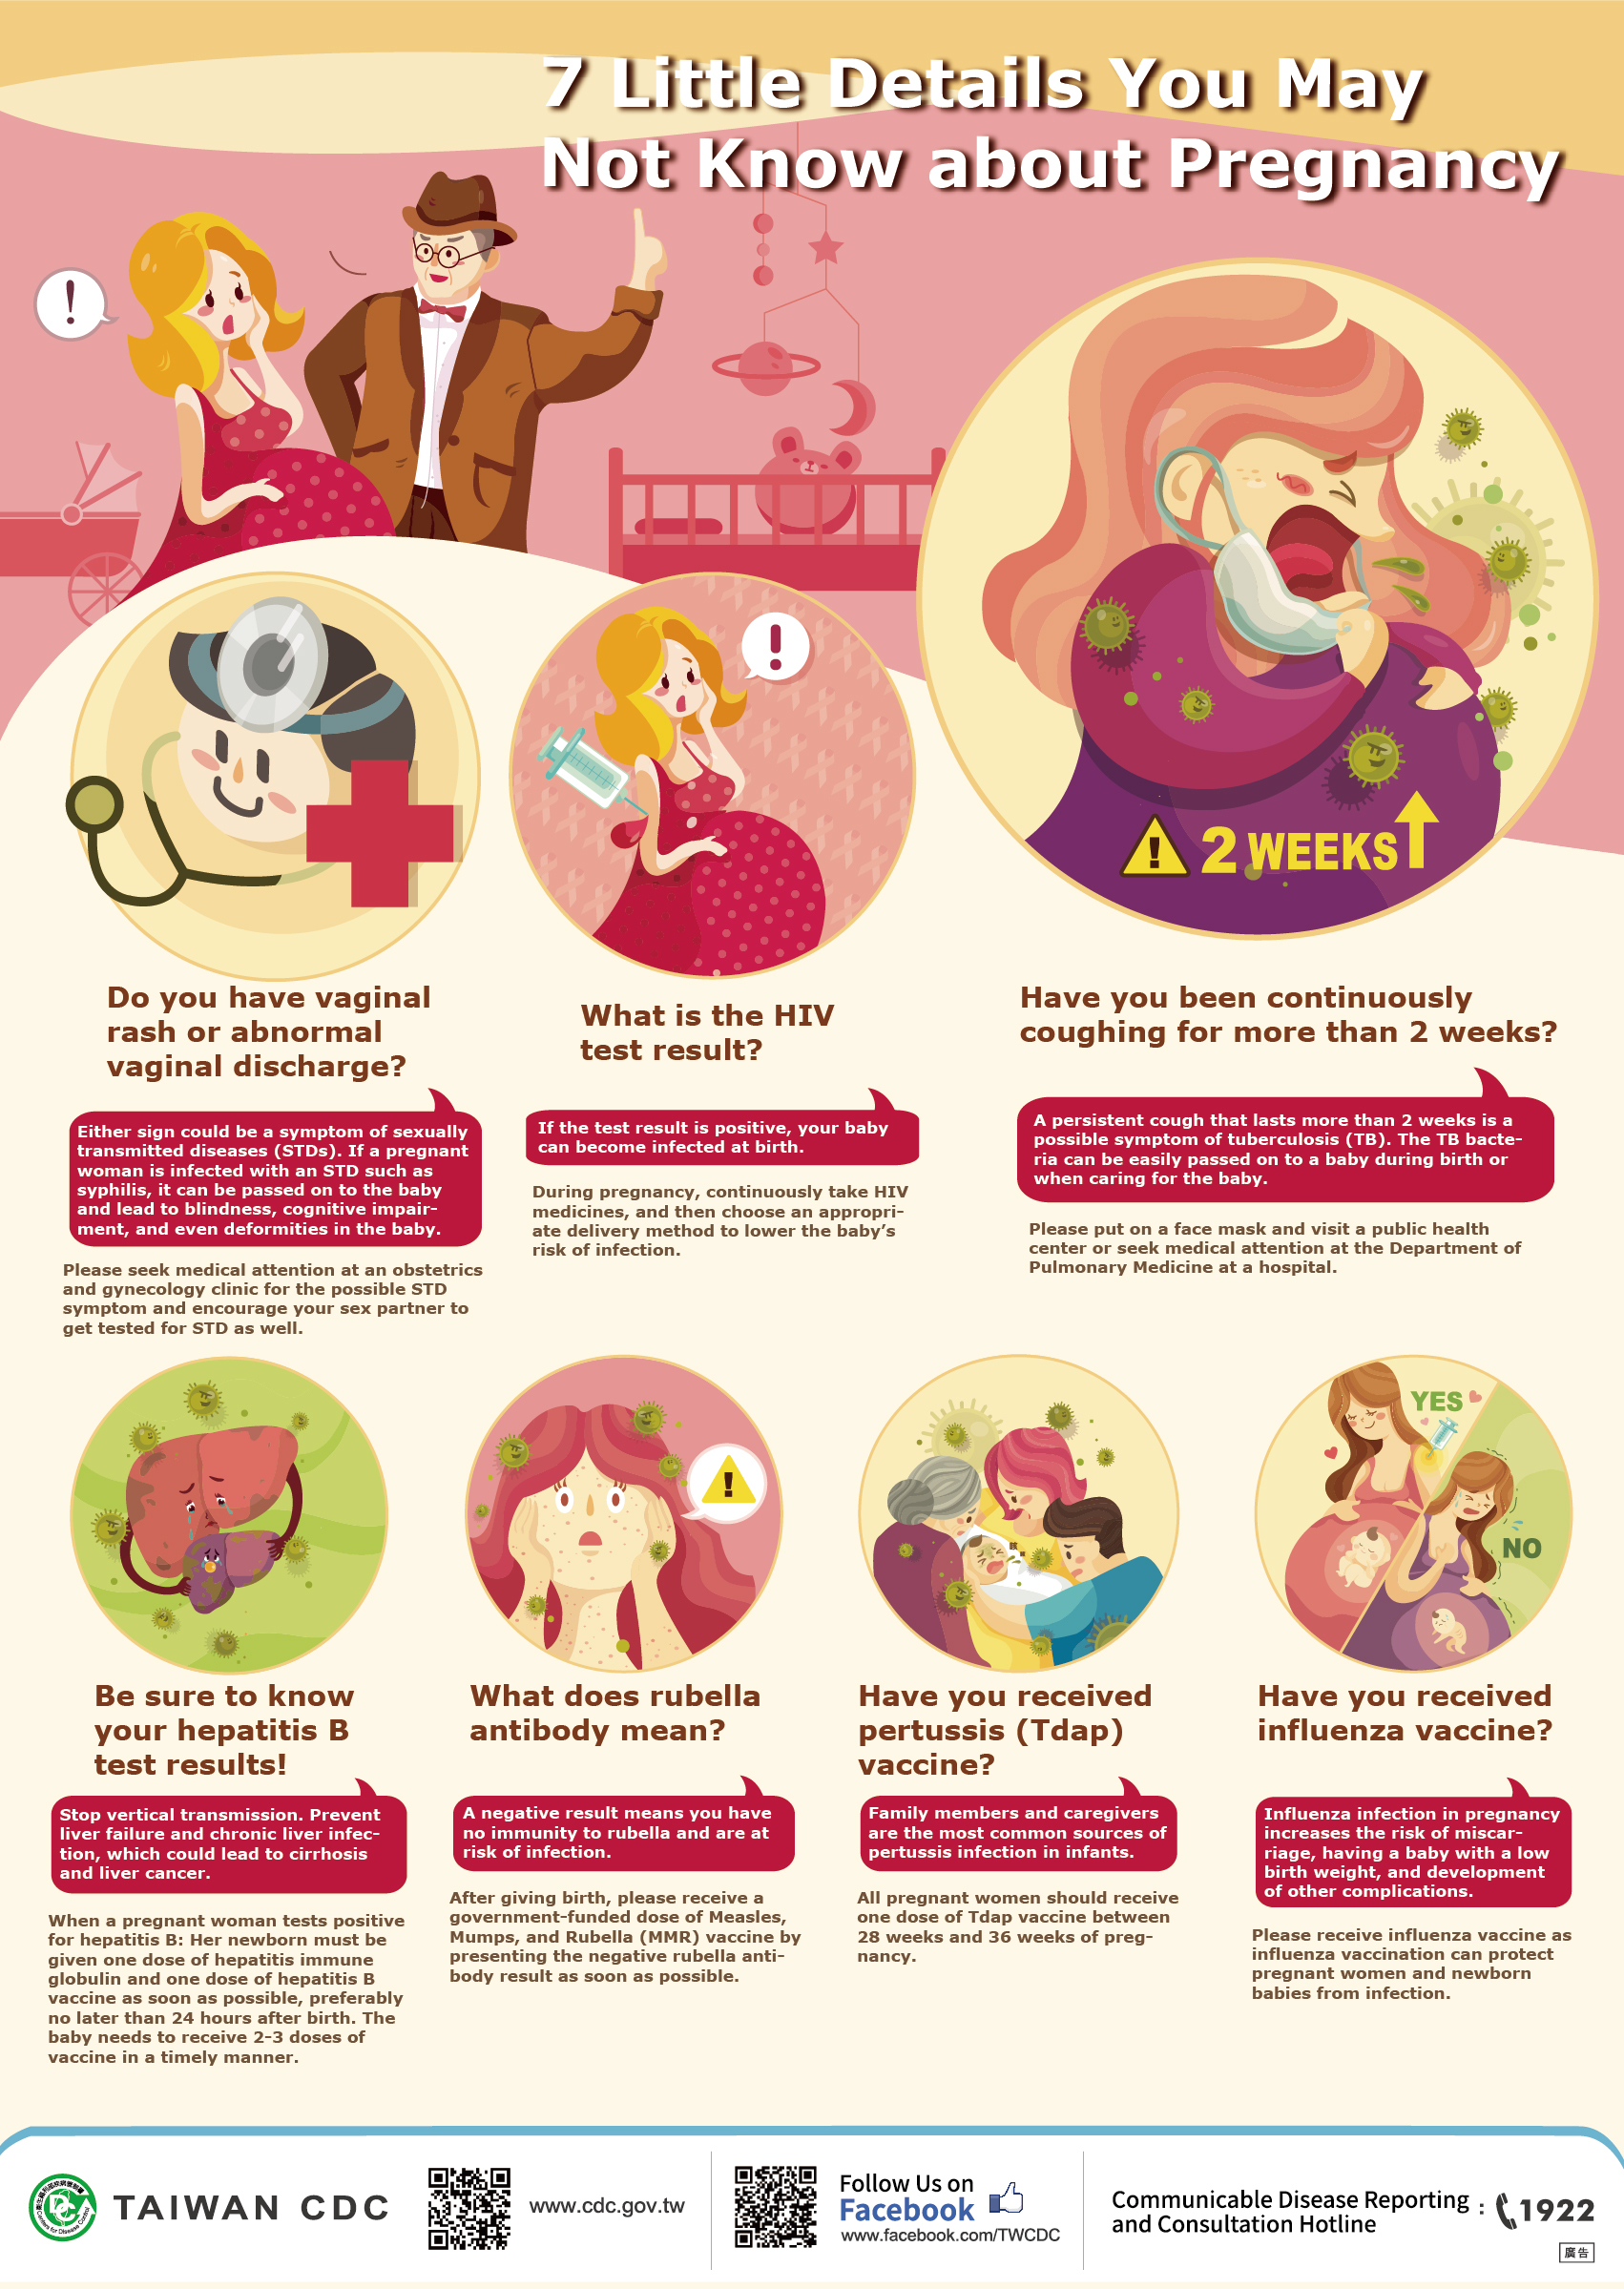 7 Things you may not know about pregnancy.jpg